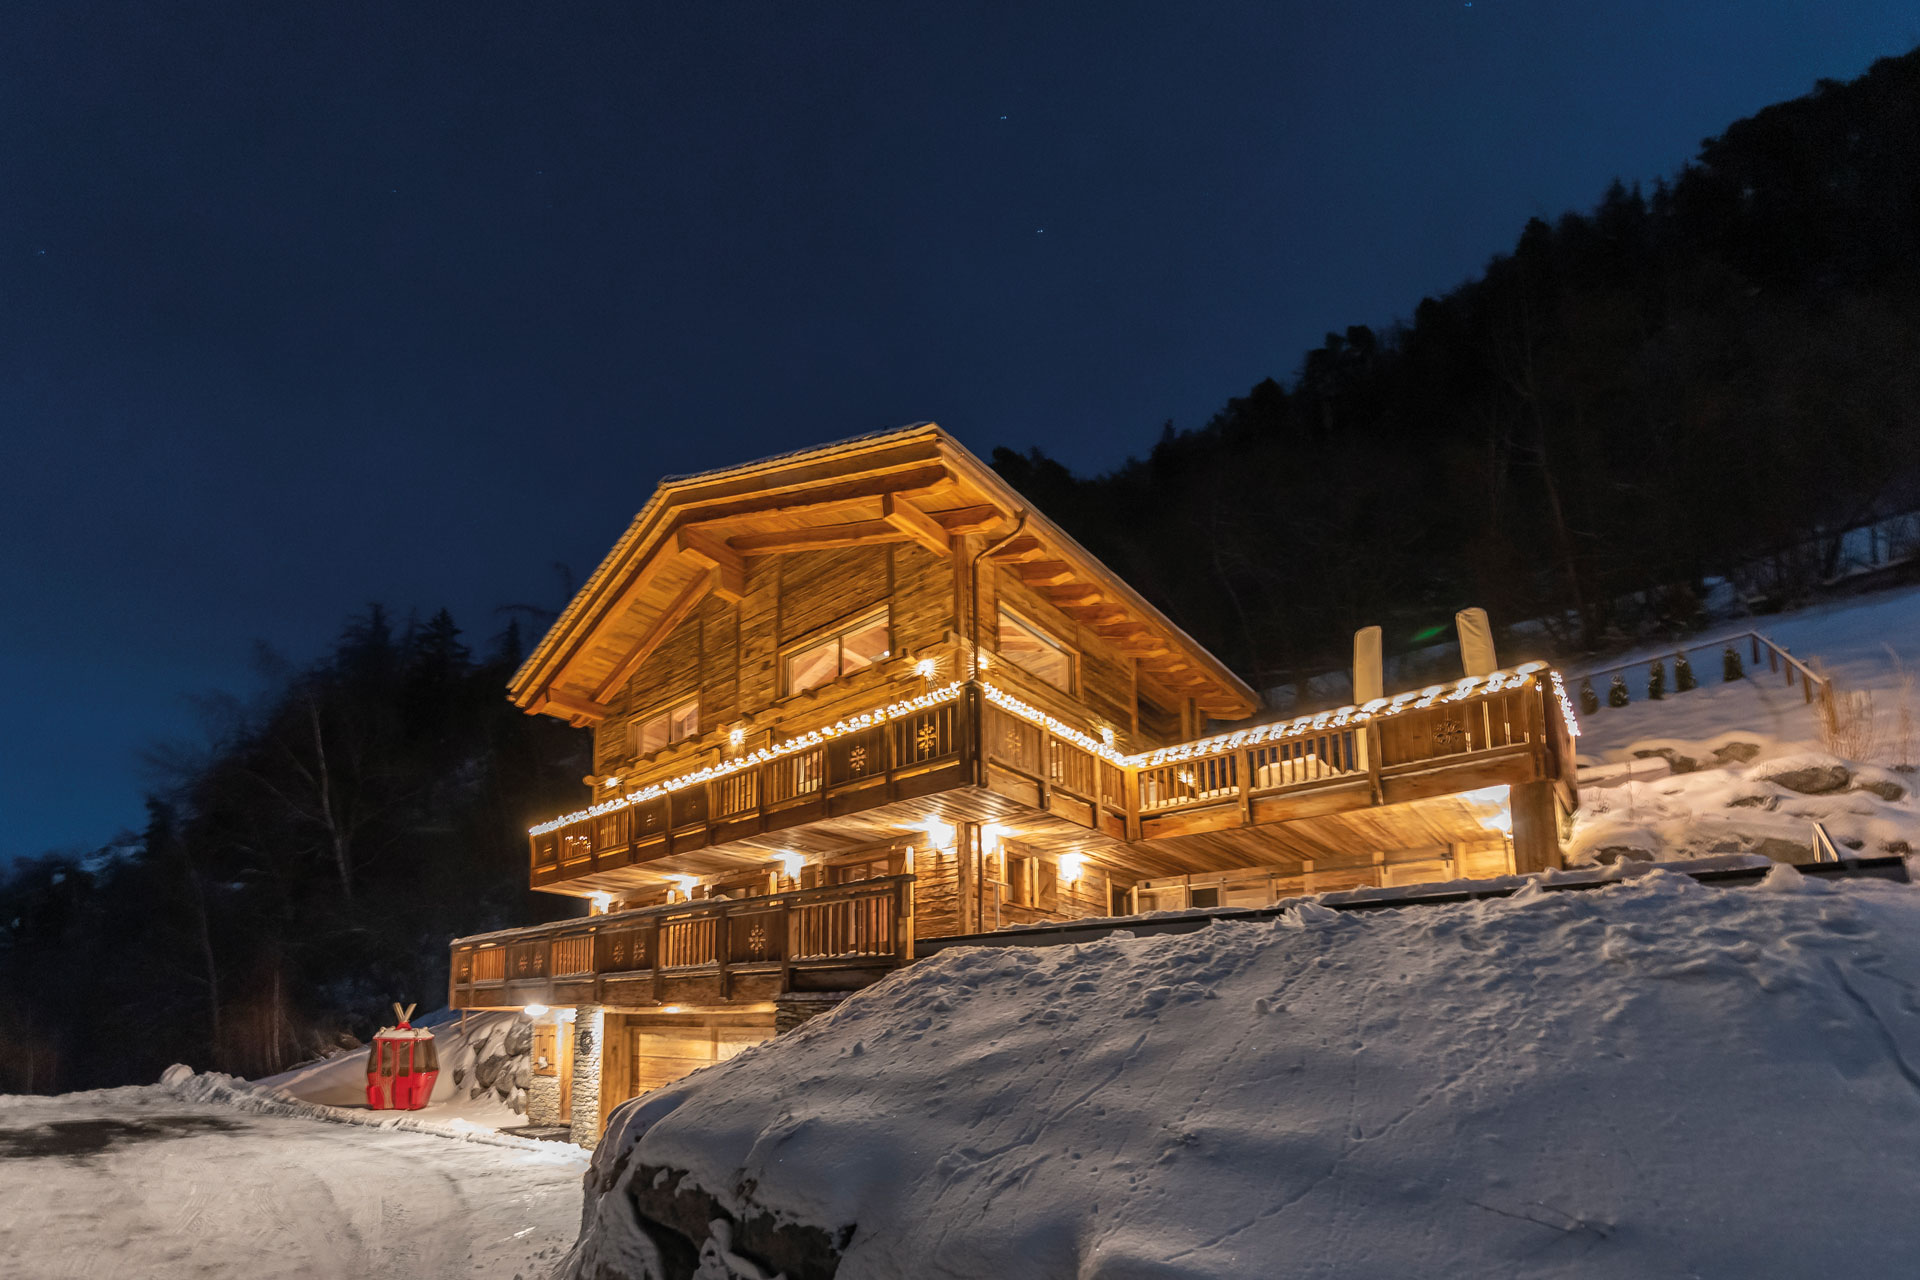 Our Editors Tried The Most Luxurious Ski Hotels & Chalets In The World – This Is Where They'd Stay Again